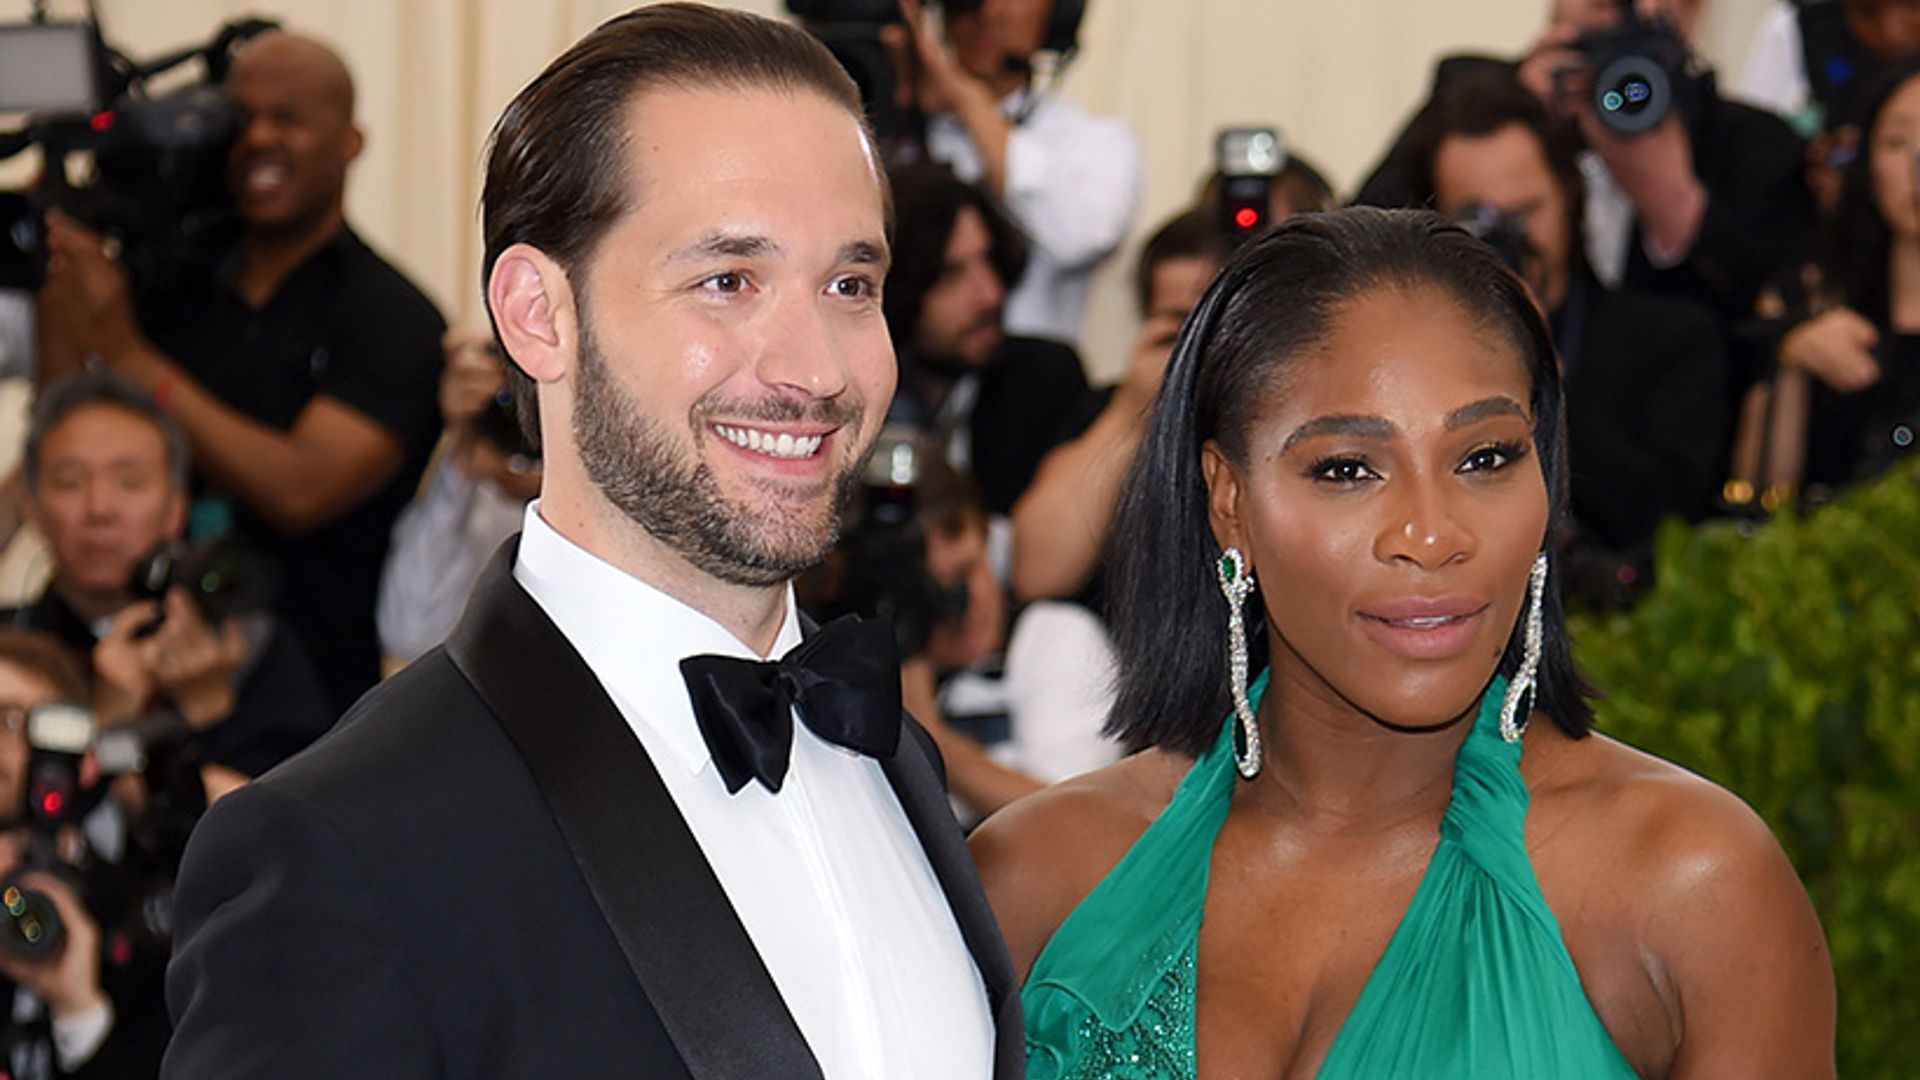 Serena Williams shares sweet moments with baby Alexis: see the photos